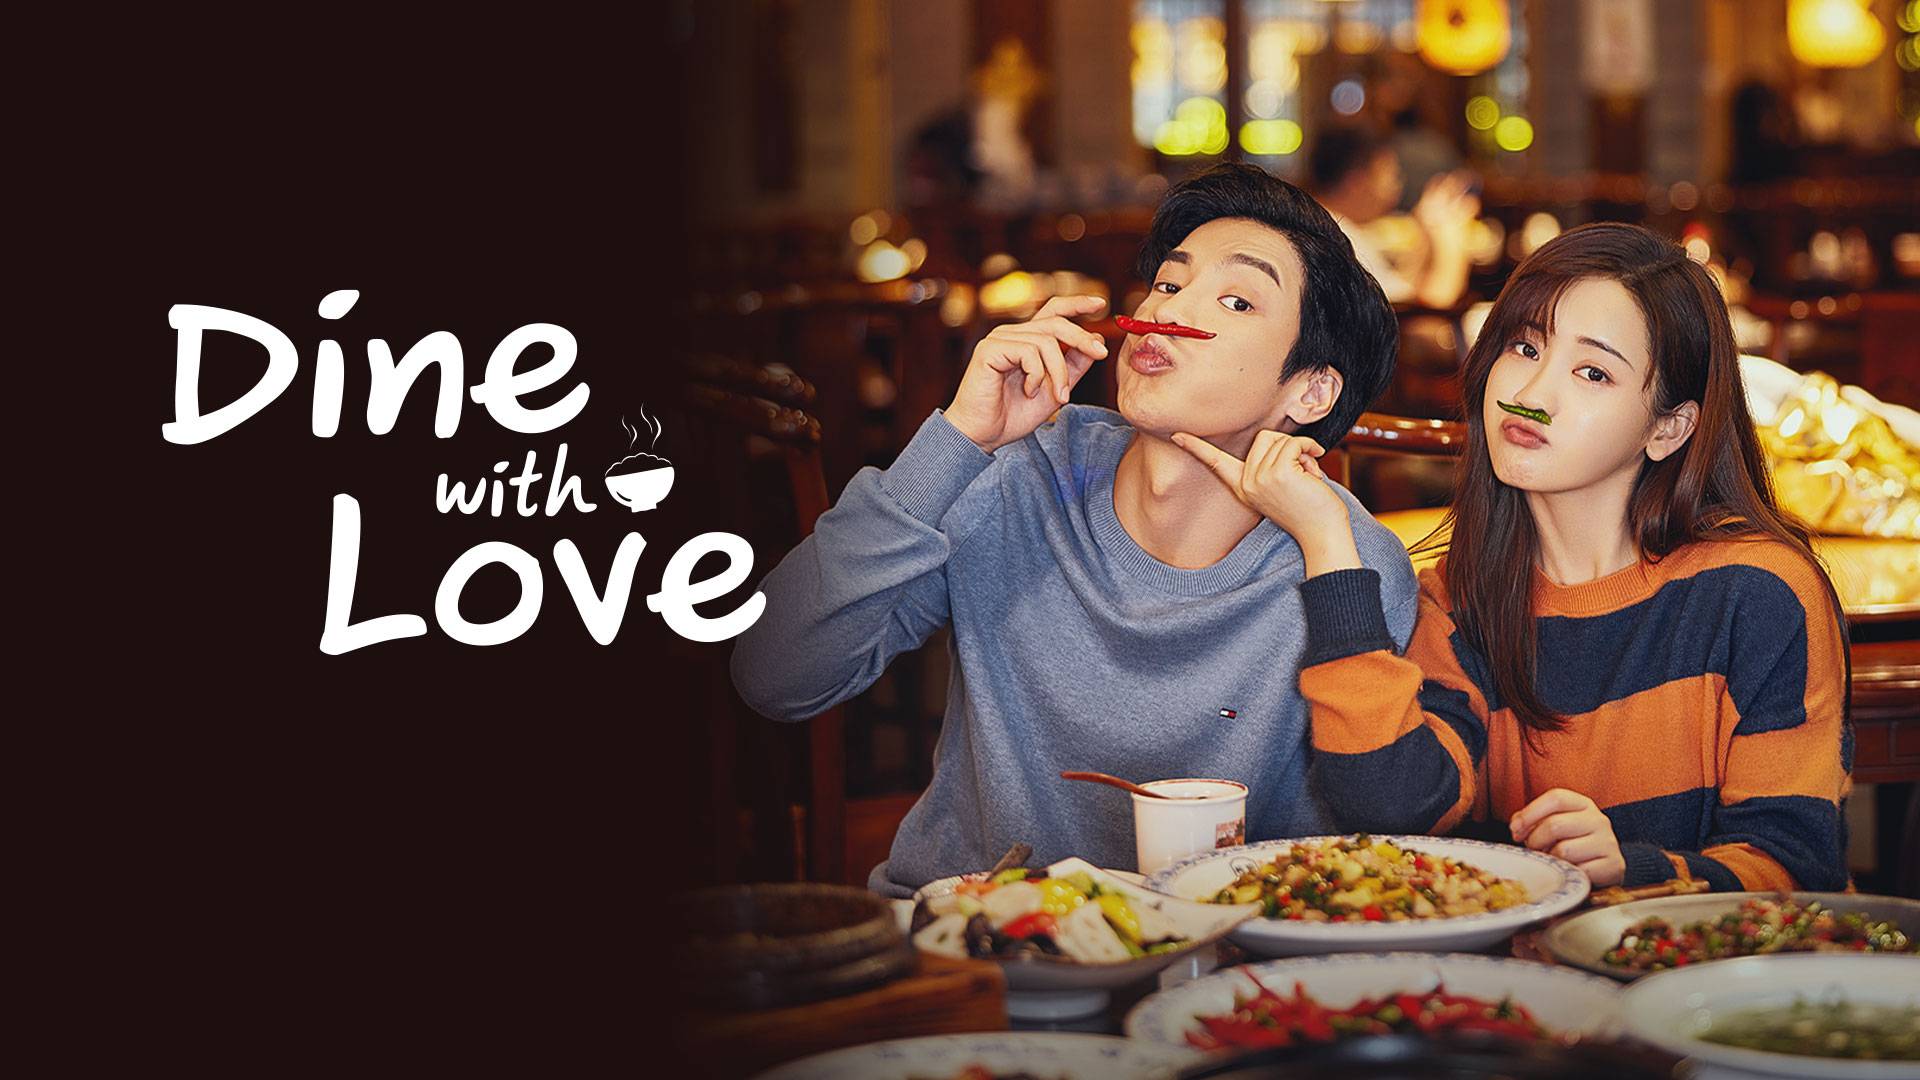 Dine with Love - Watch Series Online